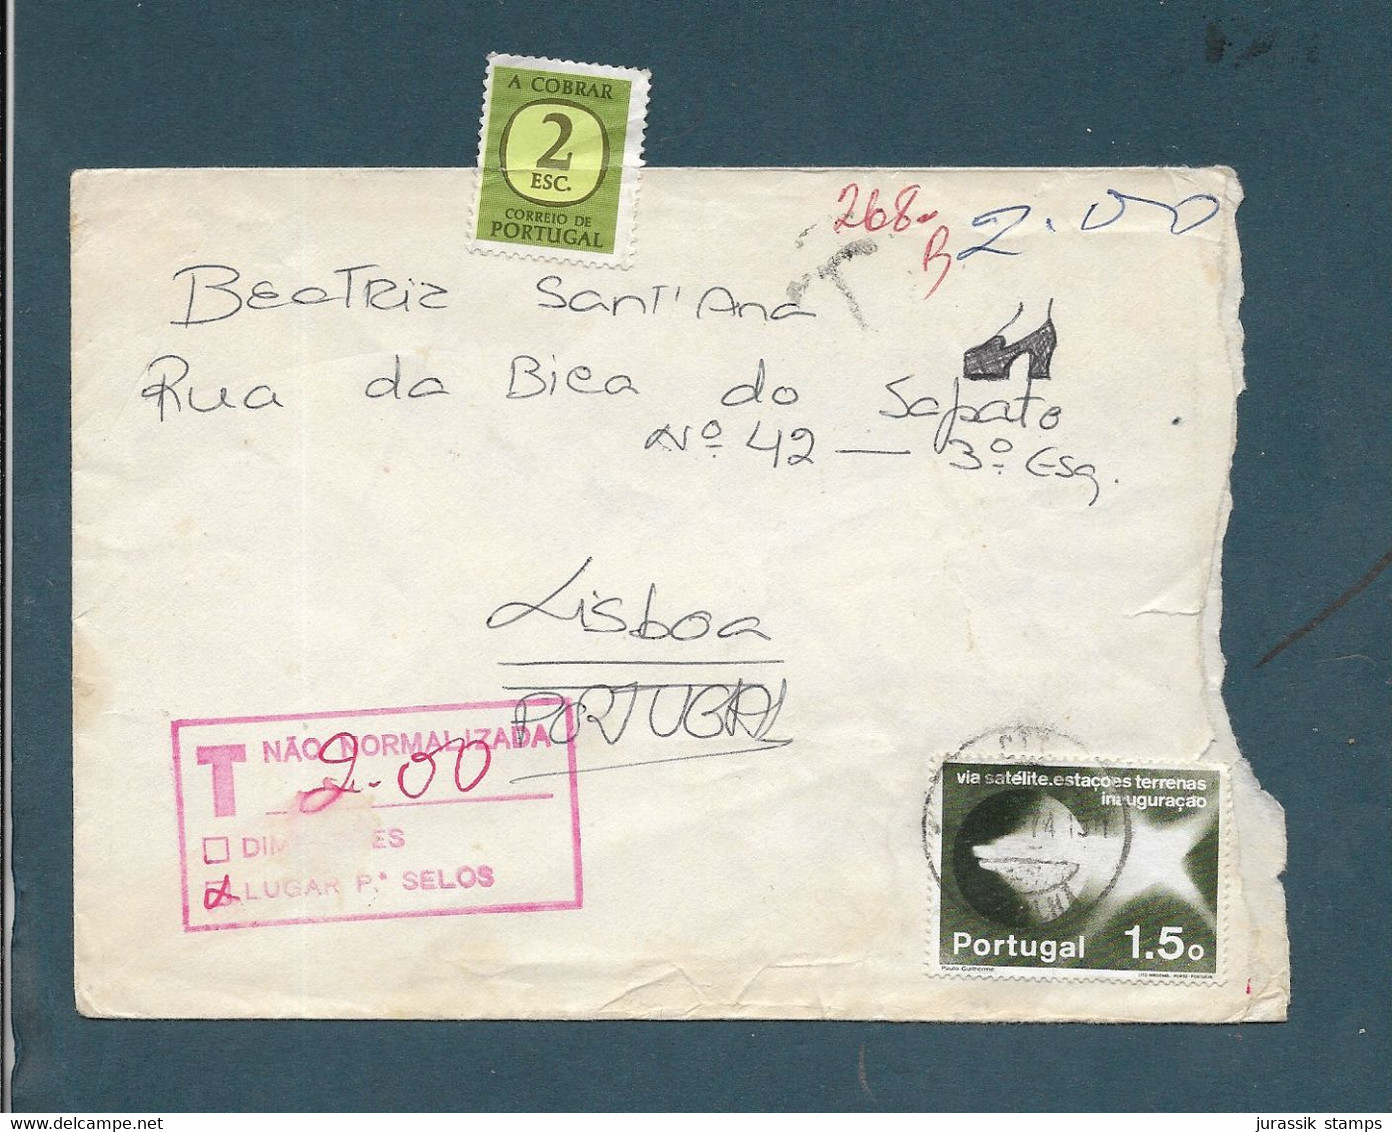 Portugal  -1974 COVER POSTAGE DUE  - P2121 - Storia Postale